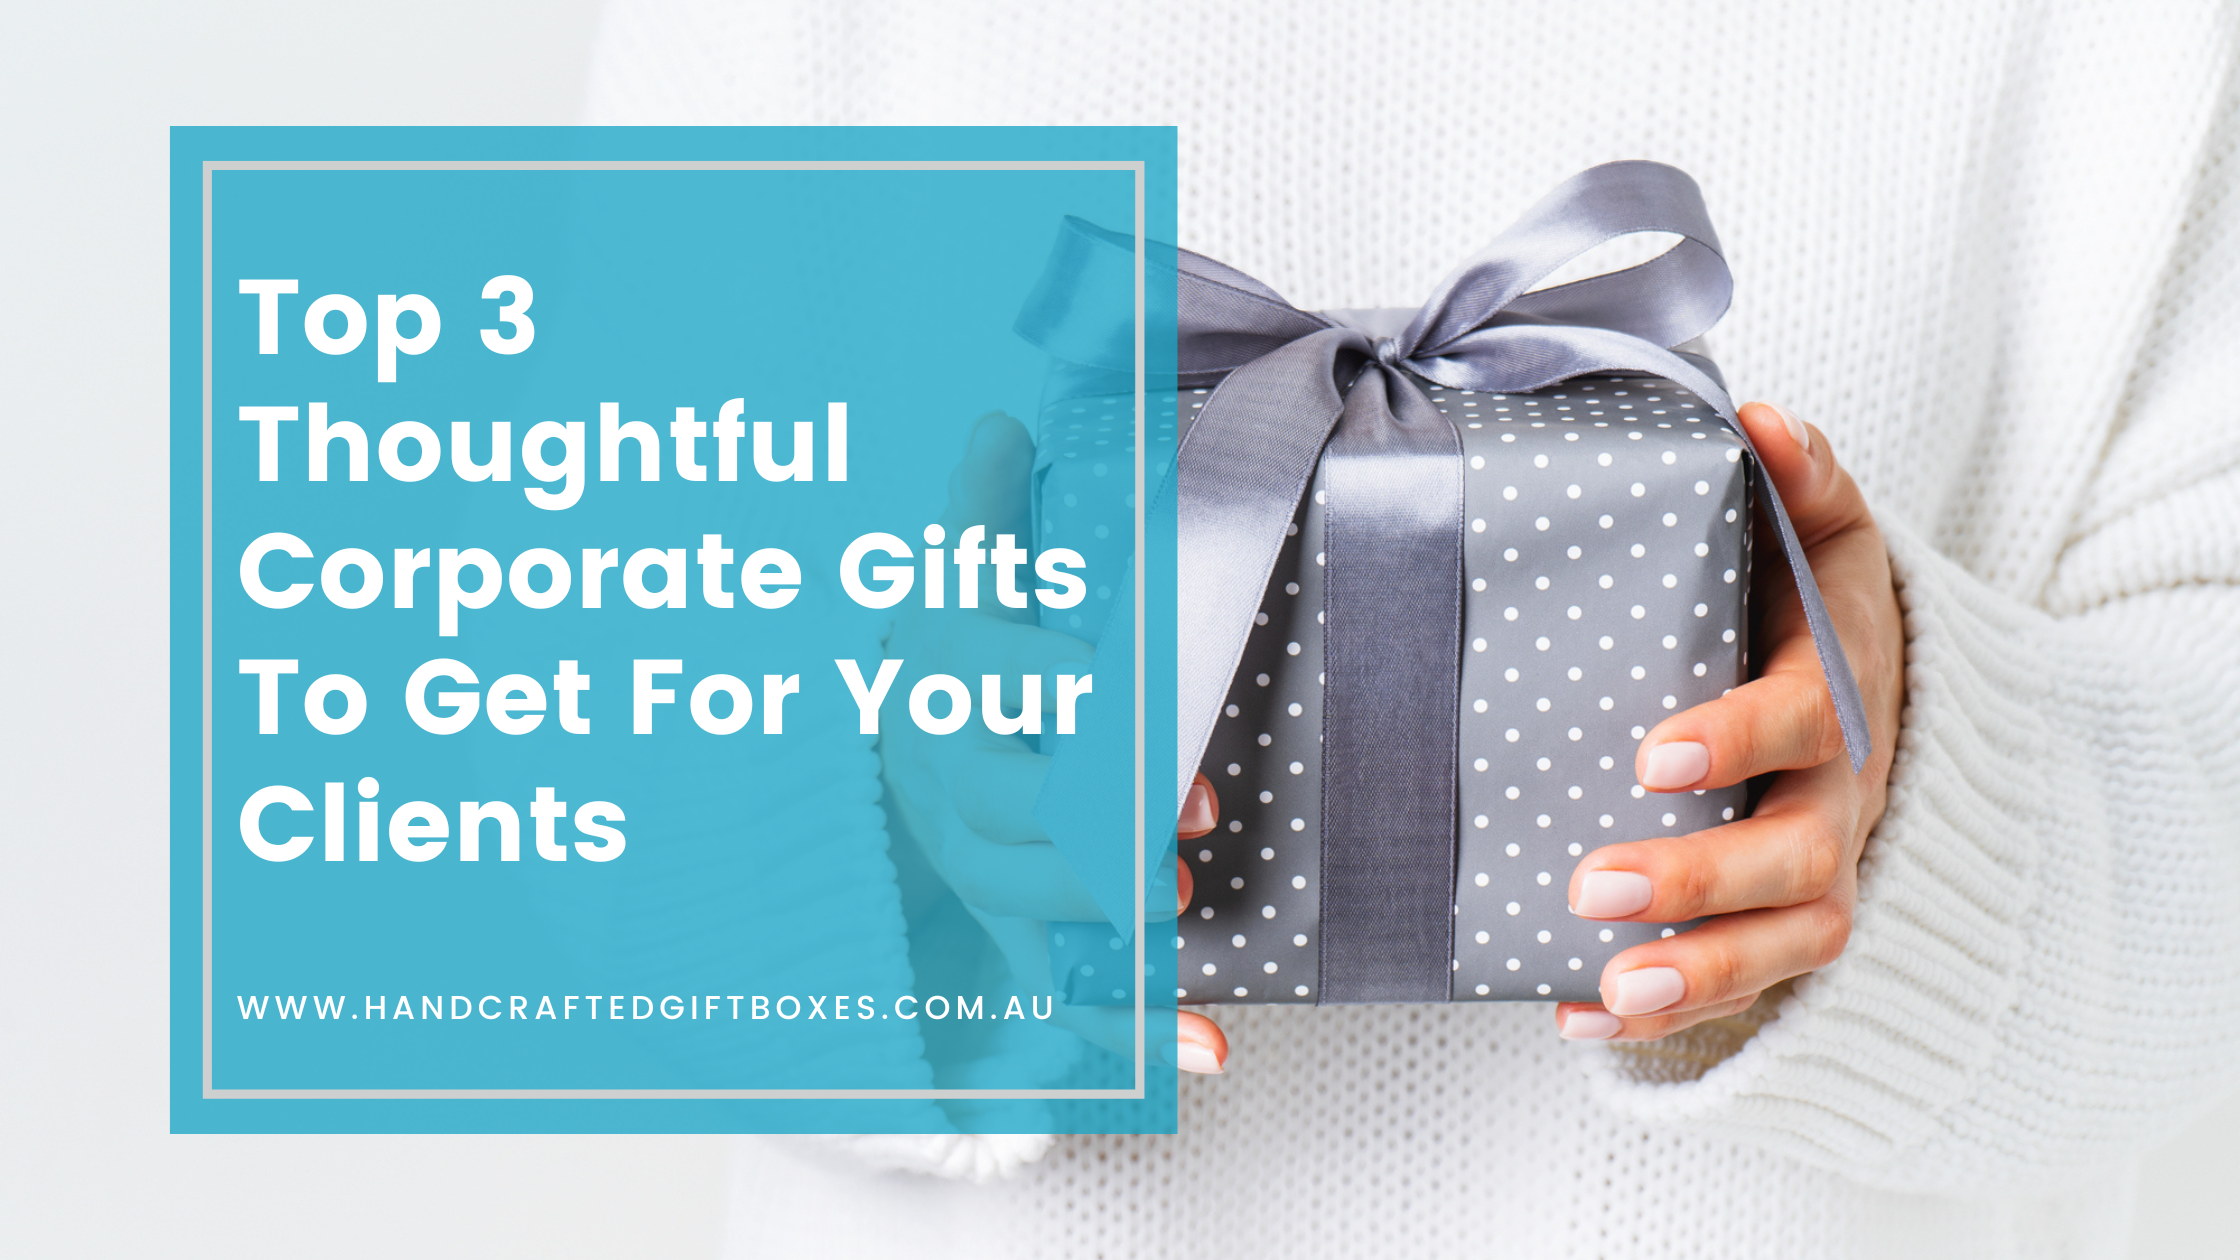 110 Corporate Gift Ideas That Will Break Through the Noise